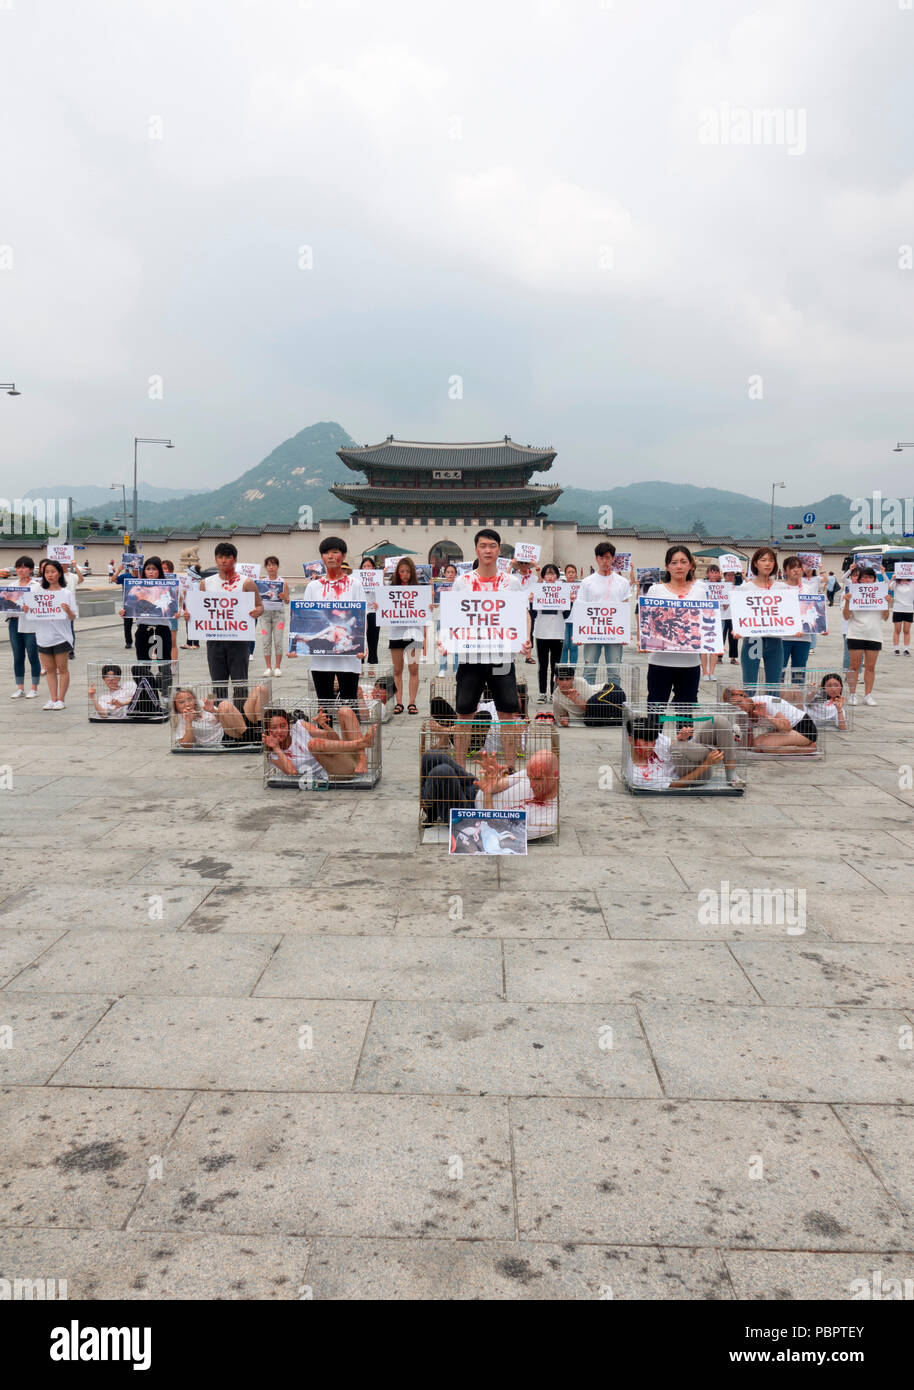 Animal advocacy campaign, July 28, 2018 : Members of an animal advocacy group perform during a campaign against dog meat in Seoul, South Korea. Dogs had been slaughtered for meat as a summertime delicacy like ginseng chicken soup typically during the Bok Nal summer season in Korea. The practice has faded markedly in recent decades amid strong objection to killing dogs for meat but animal protection groups claim thousands of dogs are slaughtered every day, local media reported. Credit: Lee Jae-Won/AFLO/Alamy Live News Stock Photo